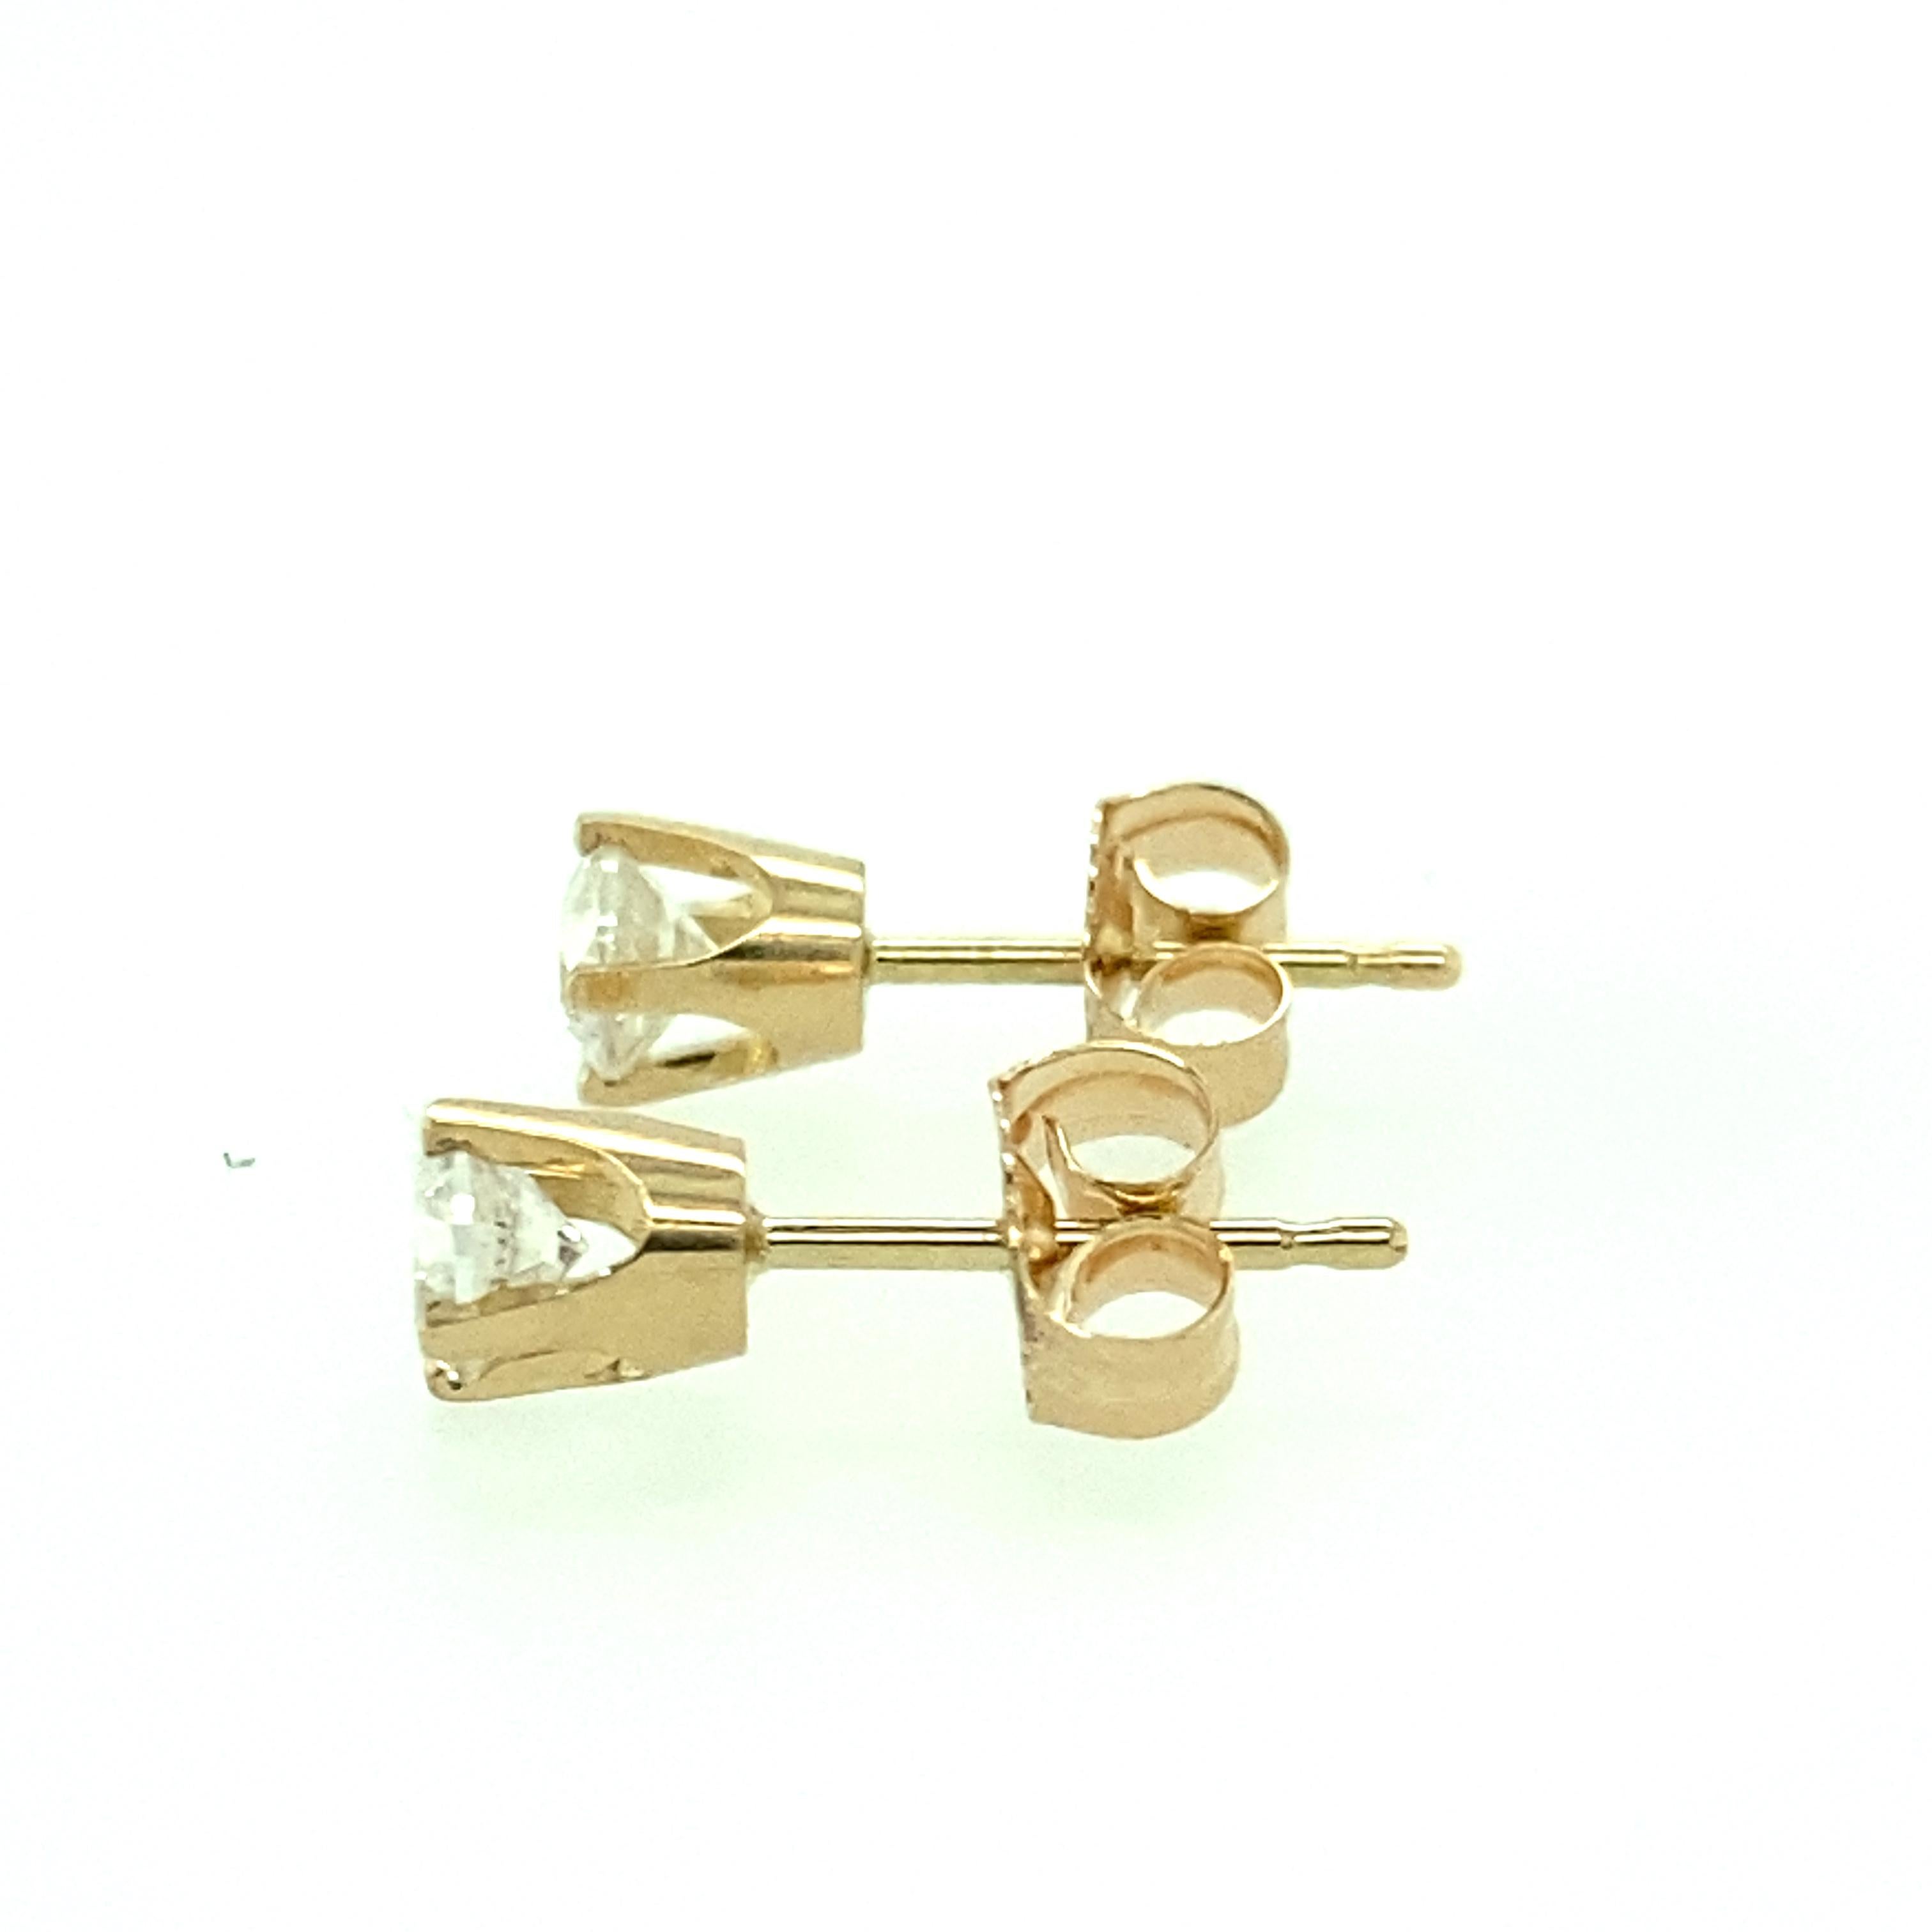 One pair of estate 14 karat yellow gold (stamped 585 14K) diamond stud earrings, each set with one round brilliant diamond, approximately 0.35 carat total weight with matching H/I color and I1 clarity.  The each diamond measures 3.73mm and are